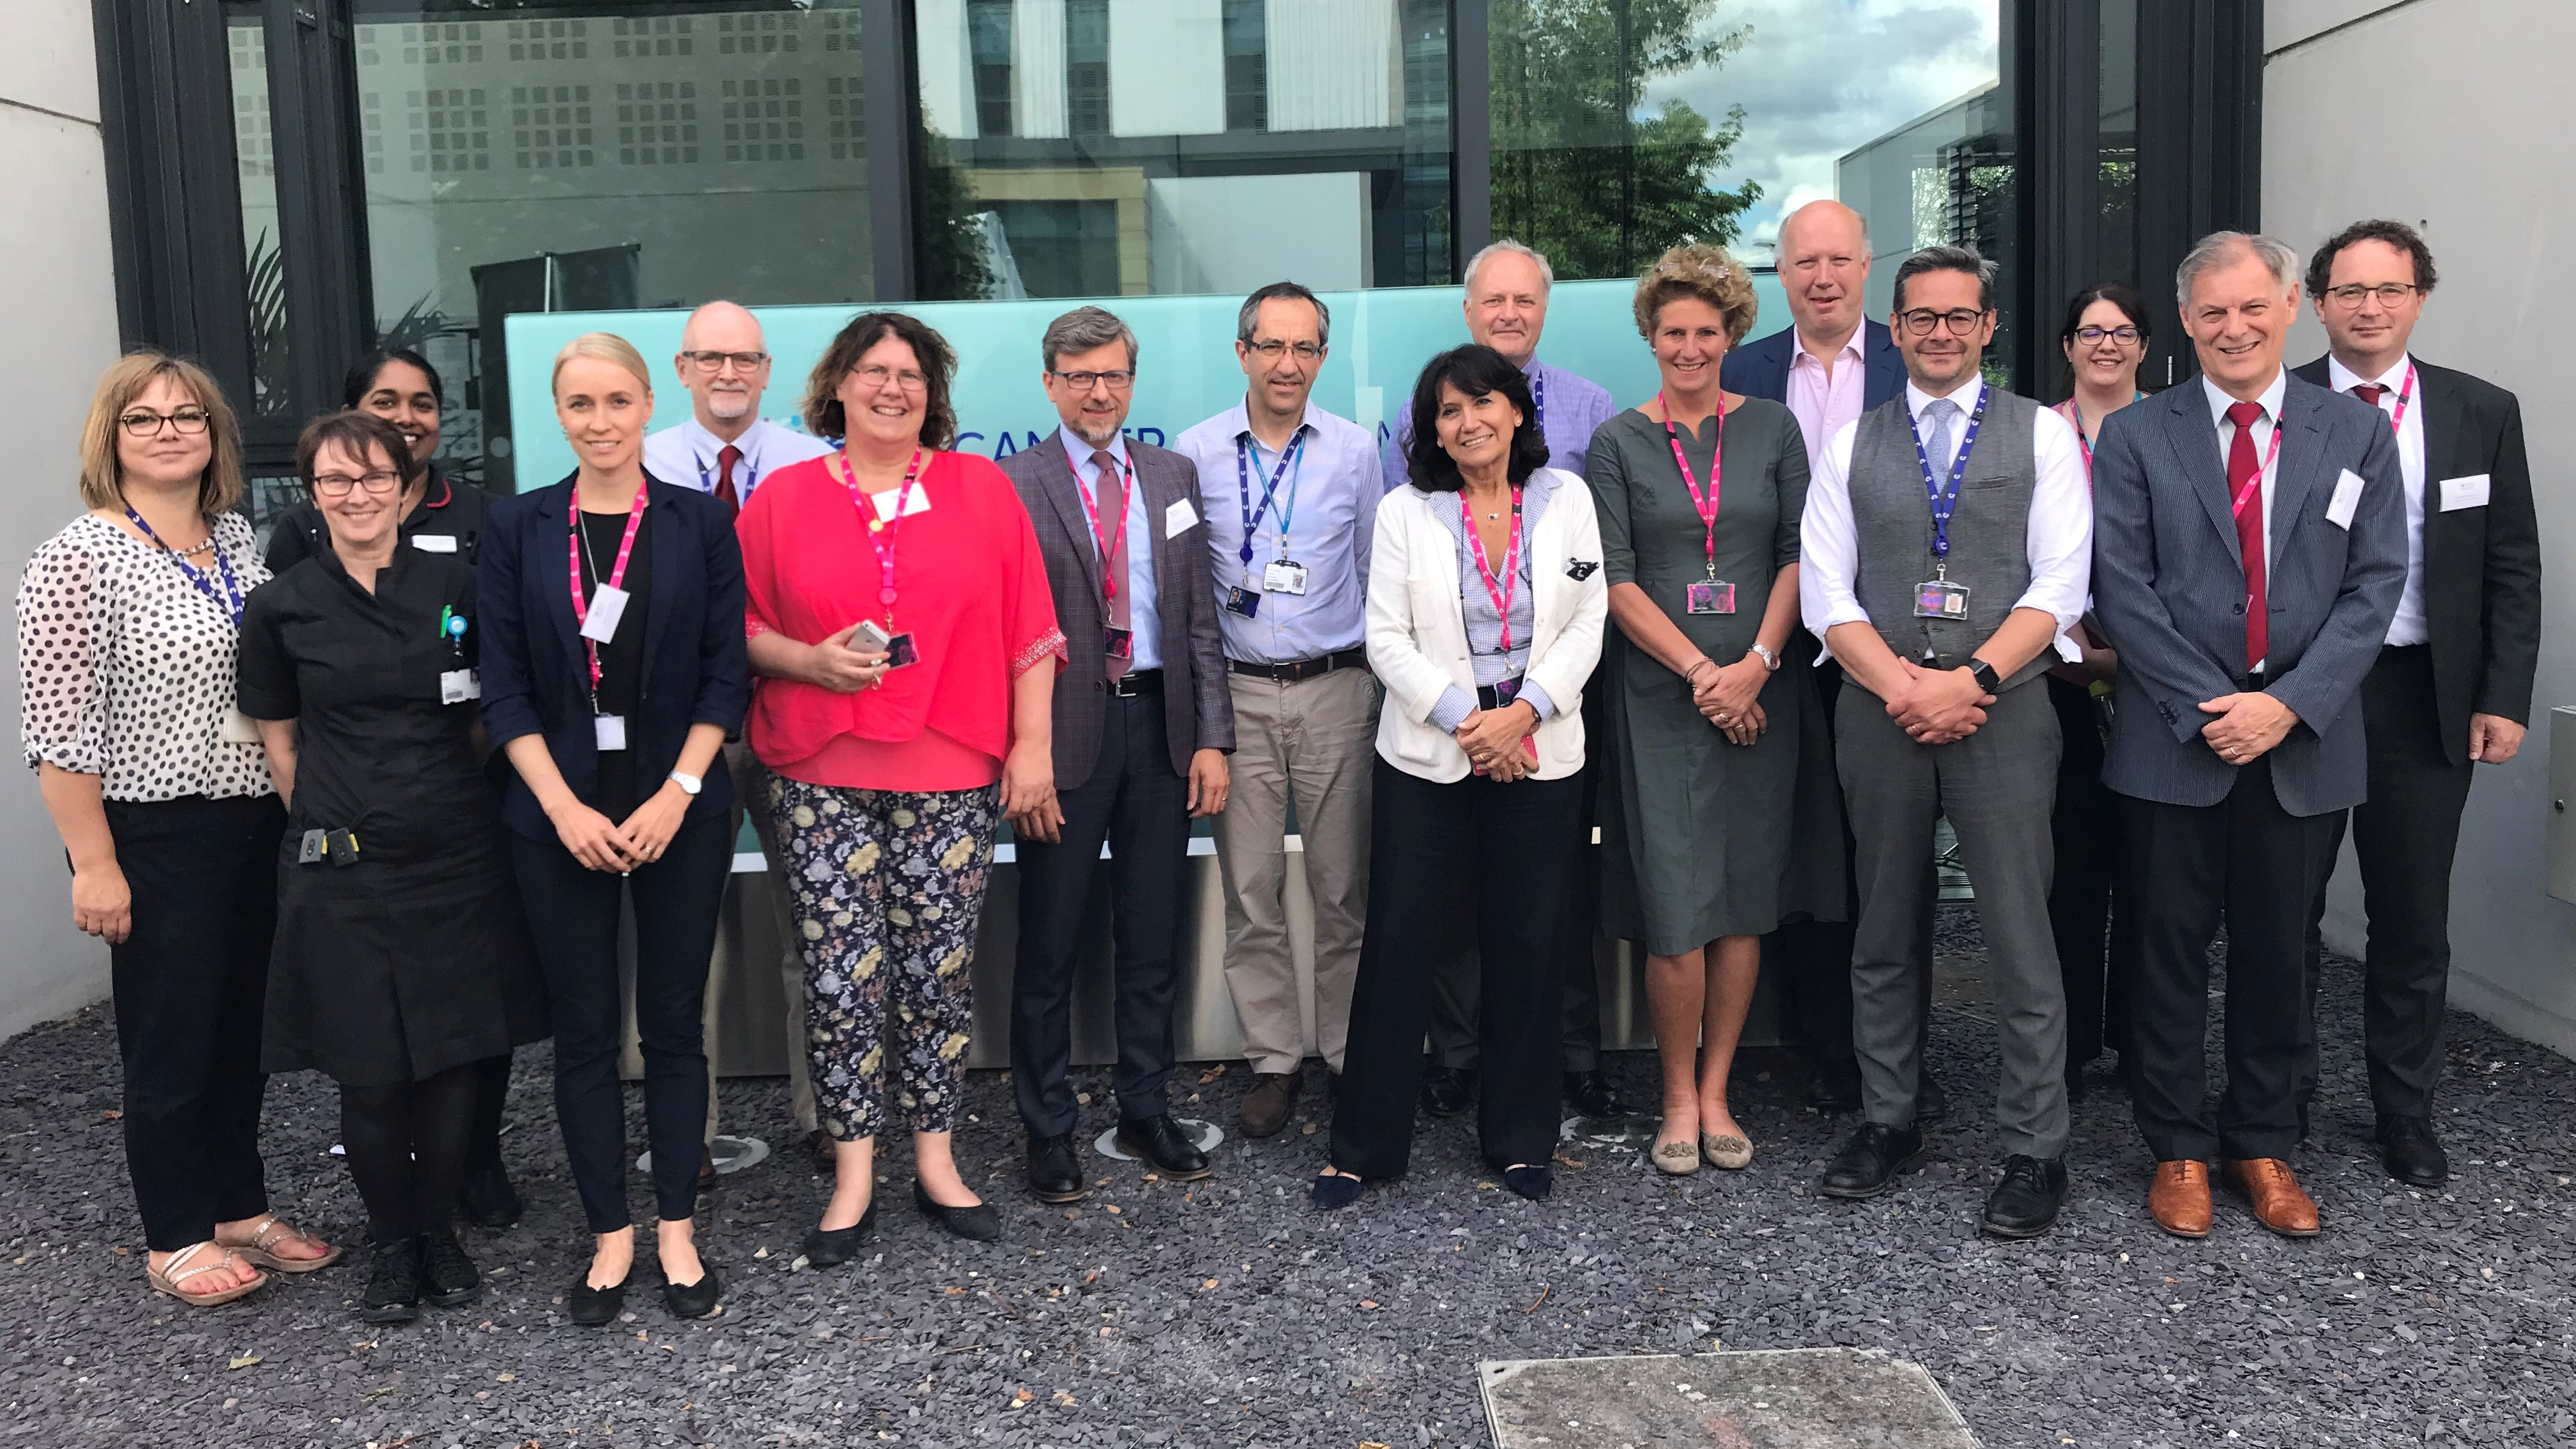 The OECI peer review team with members of the CRUK Cambridge Centre during the site visit in July 2019